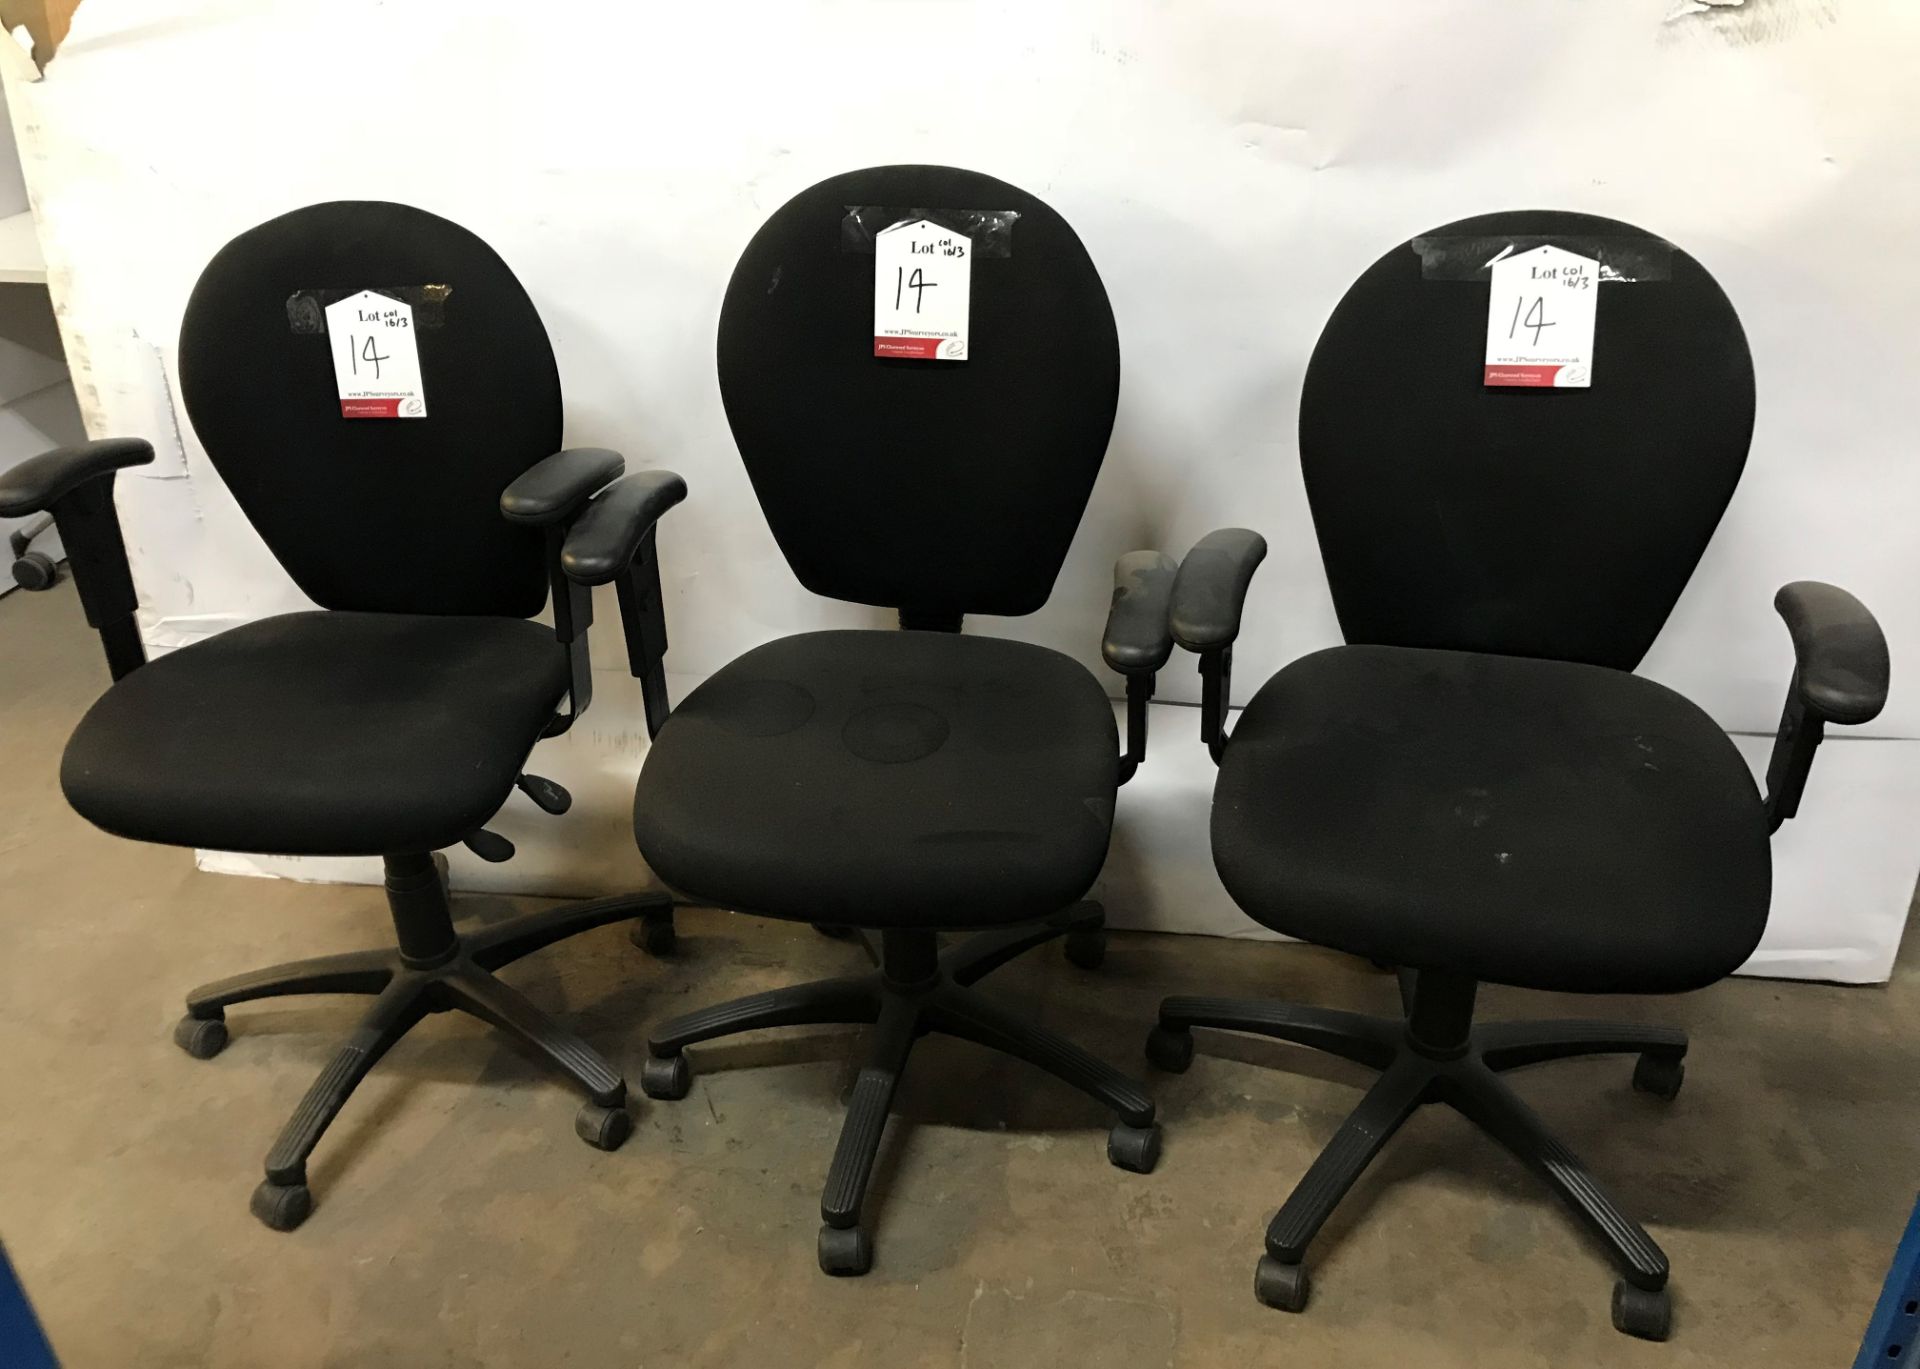 3 x Adjustable fabric office chairs